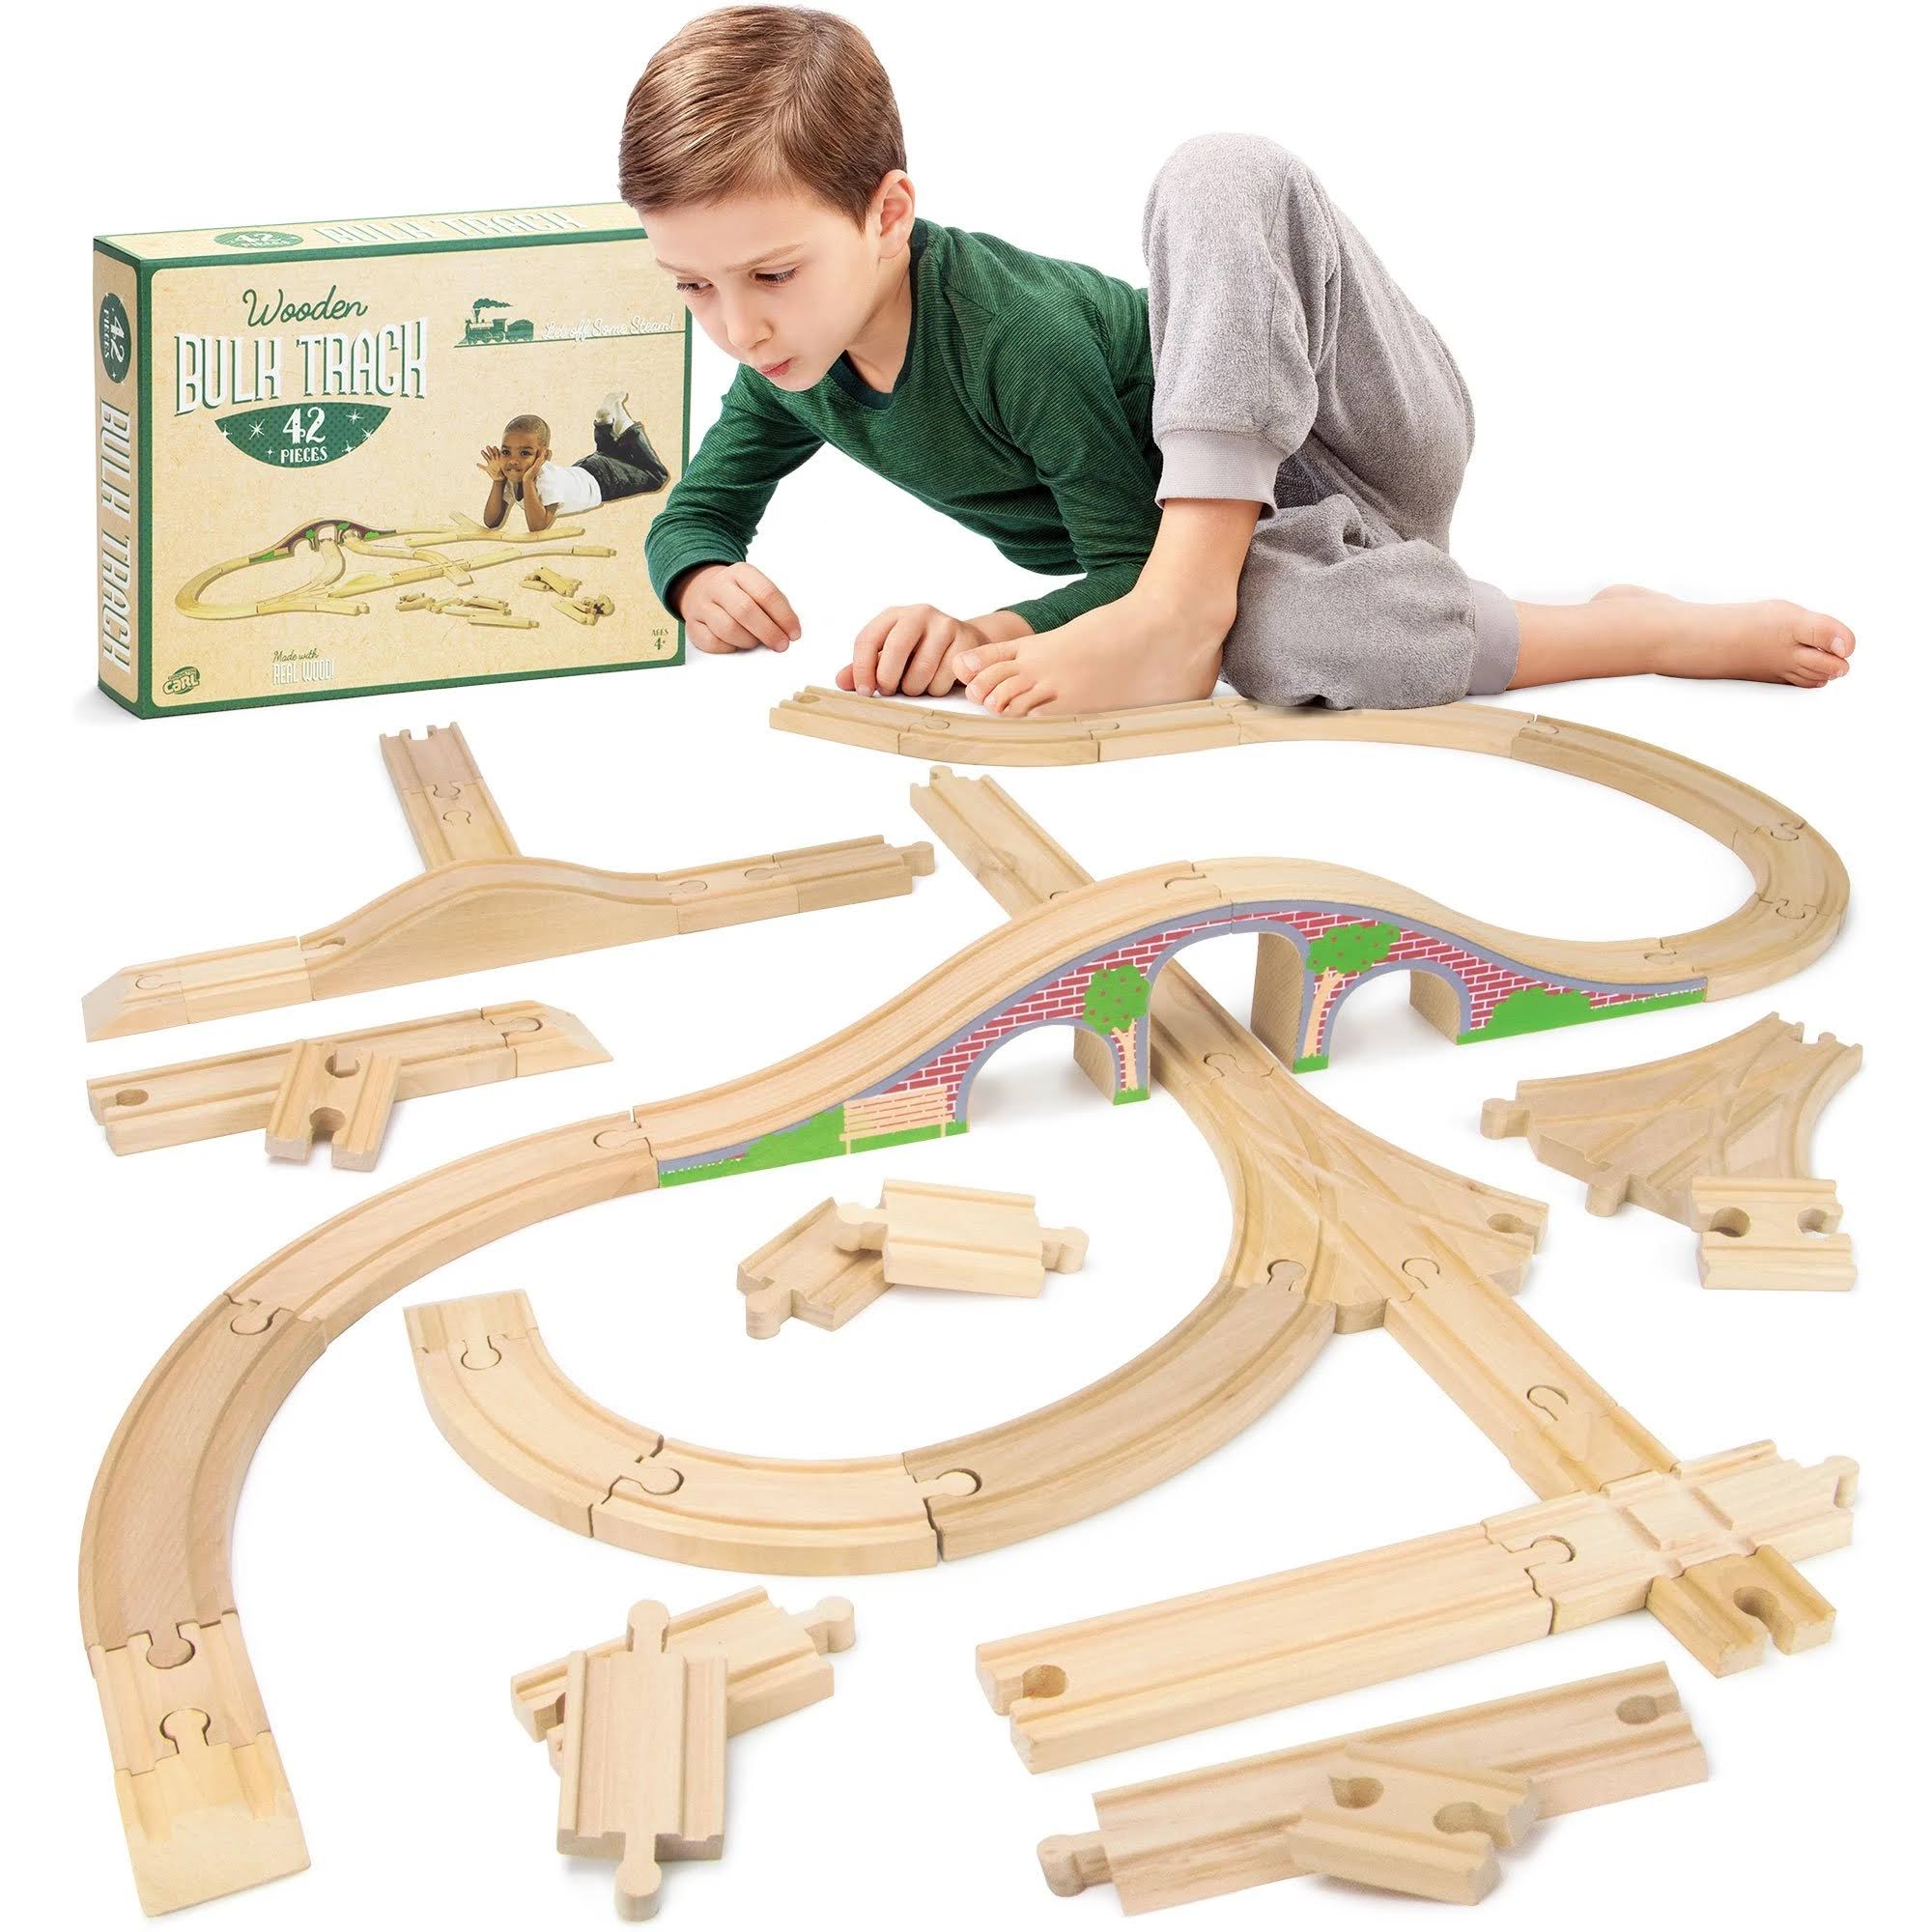 Conductor Carl 42-Piece Bulk Value Wooden Train Track Booster Pack...